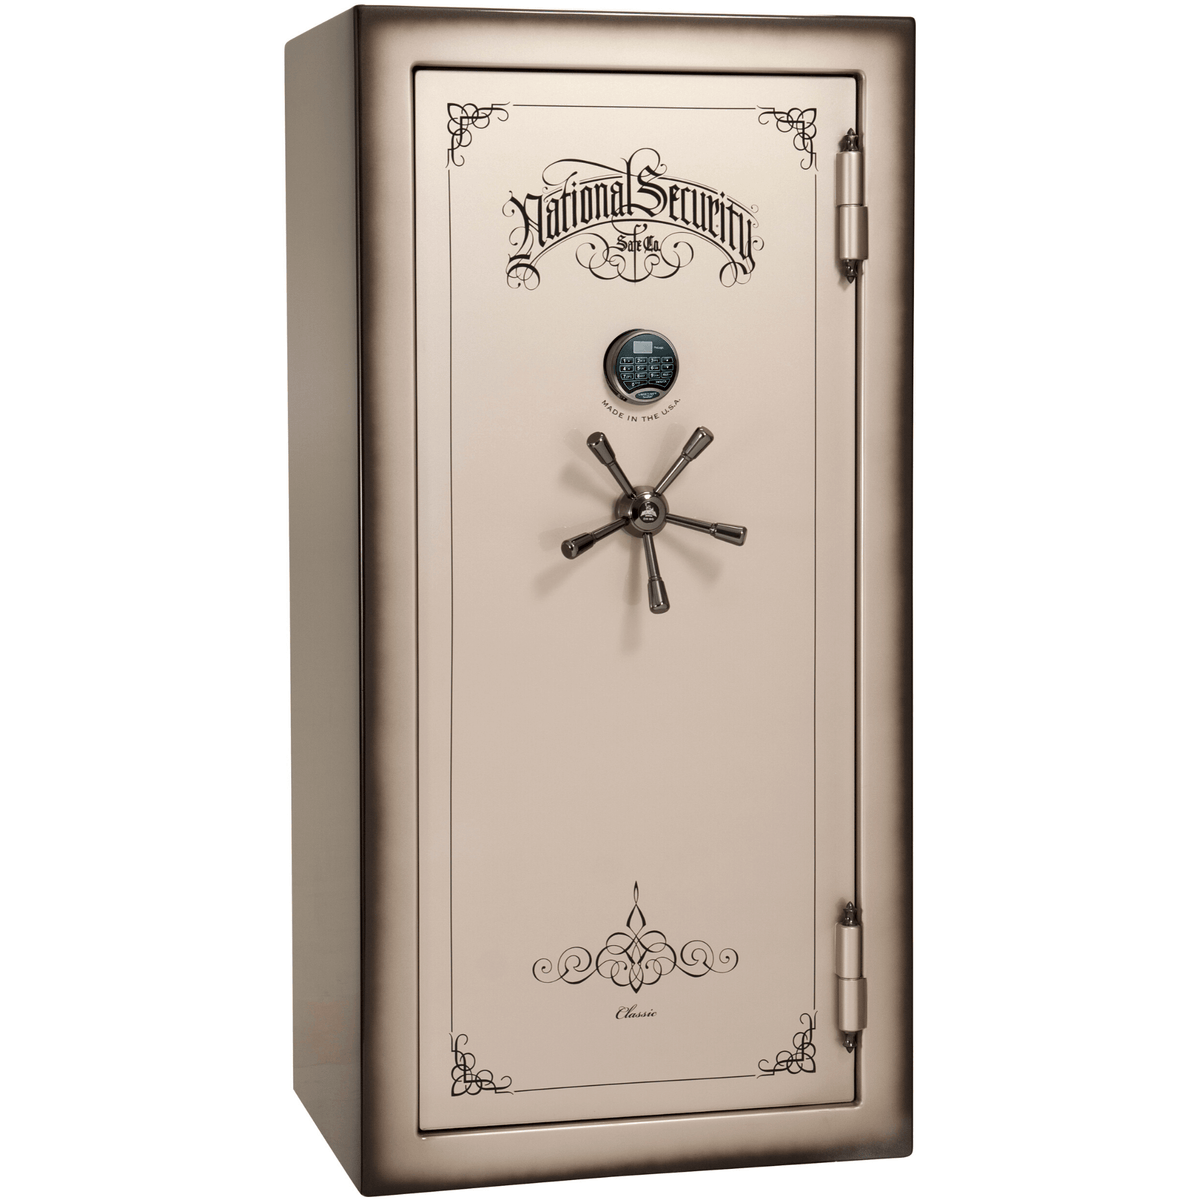 Liberty Safe Classic Plus 25 in Feathered Champagne Gloss with Black Chrome Electronic Lock, closed door.